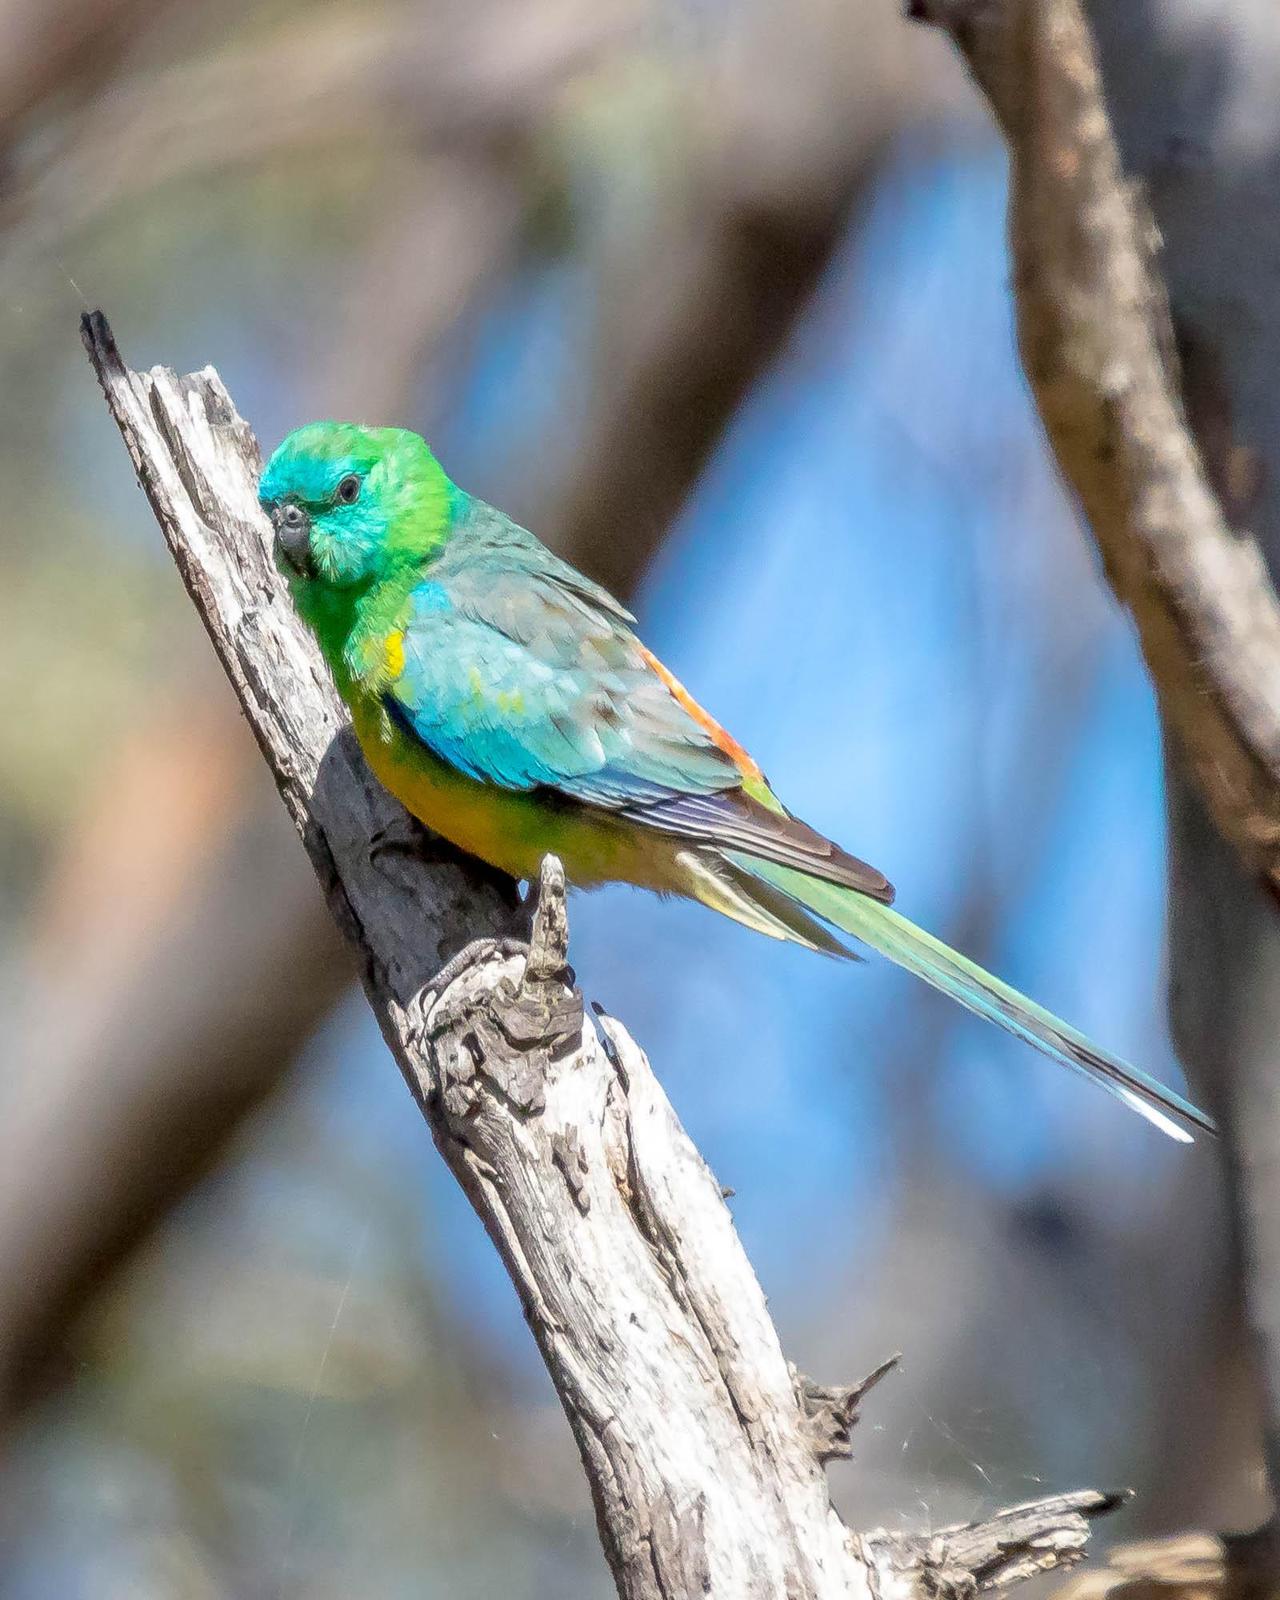 Red-rumped Parrot Photo by Denis Rivard